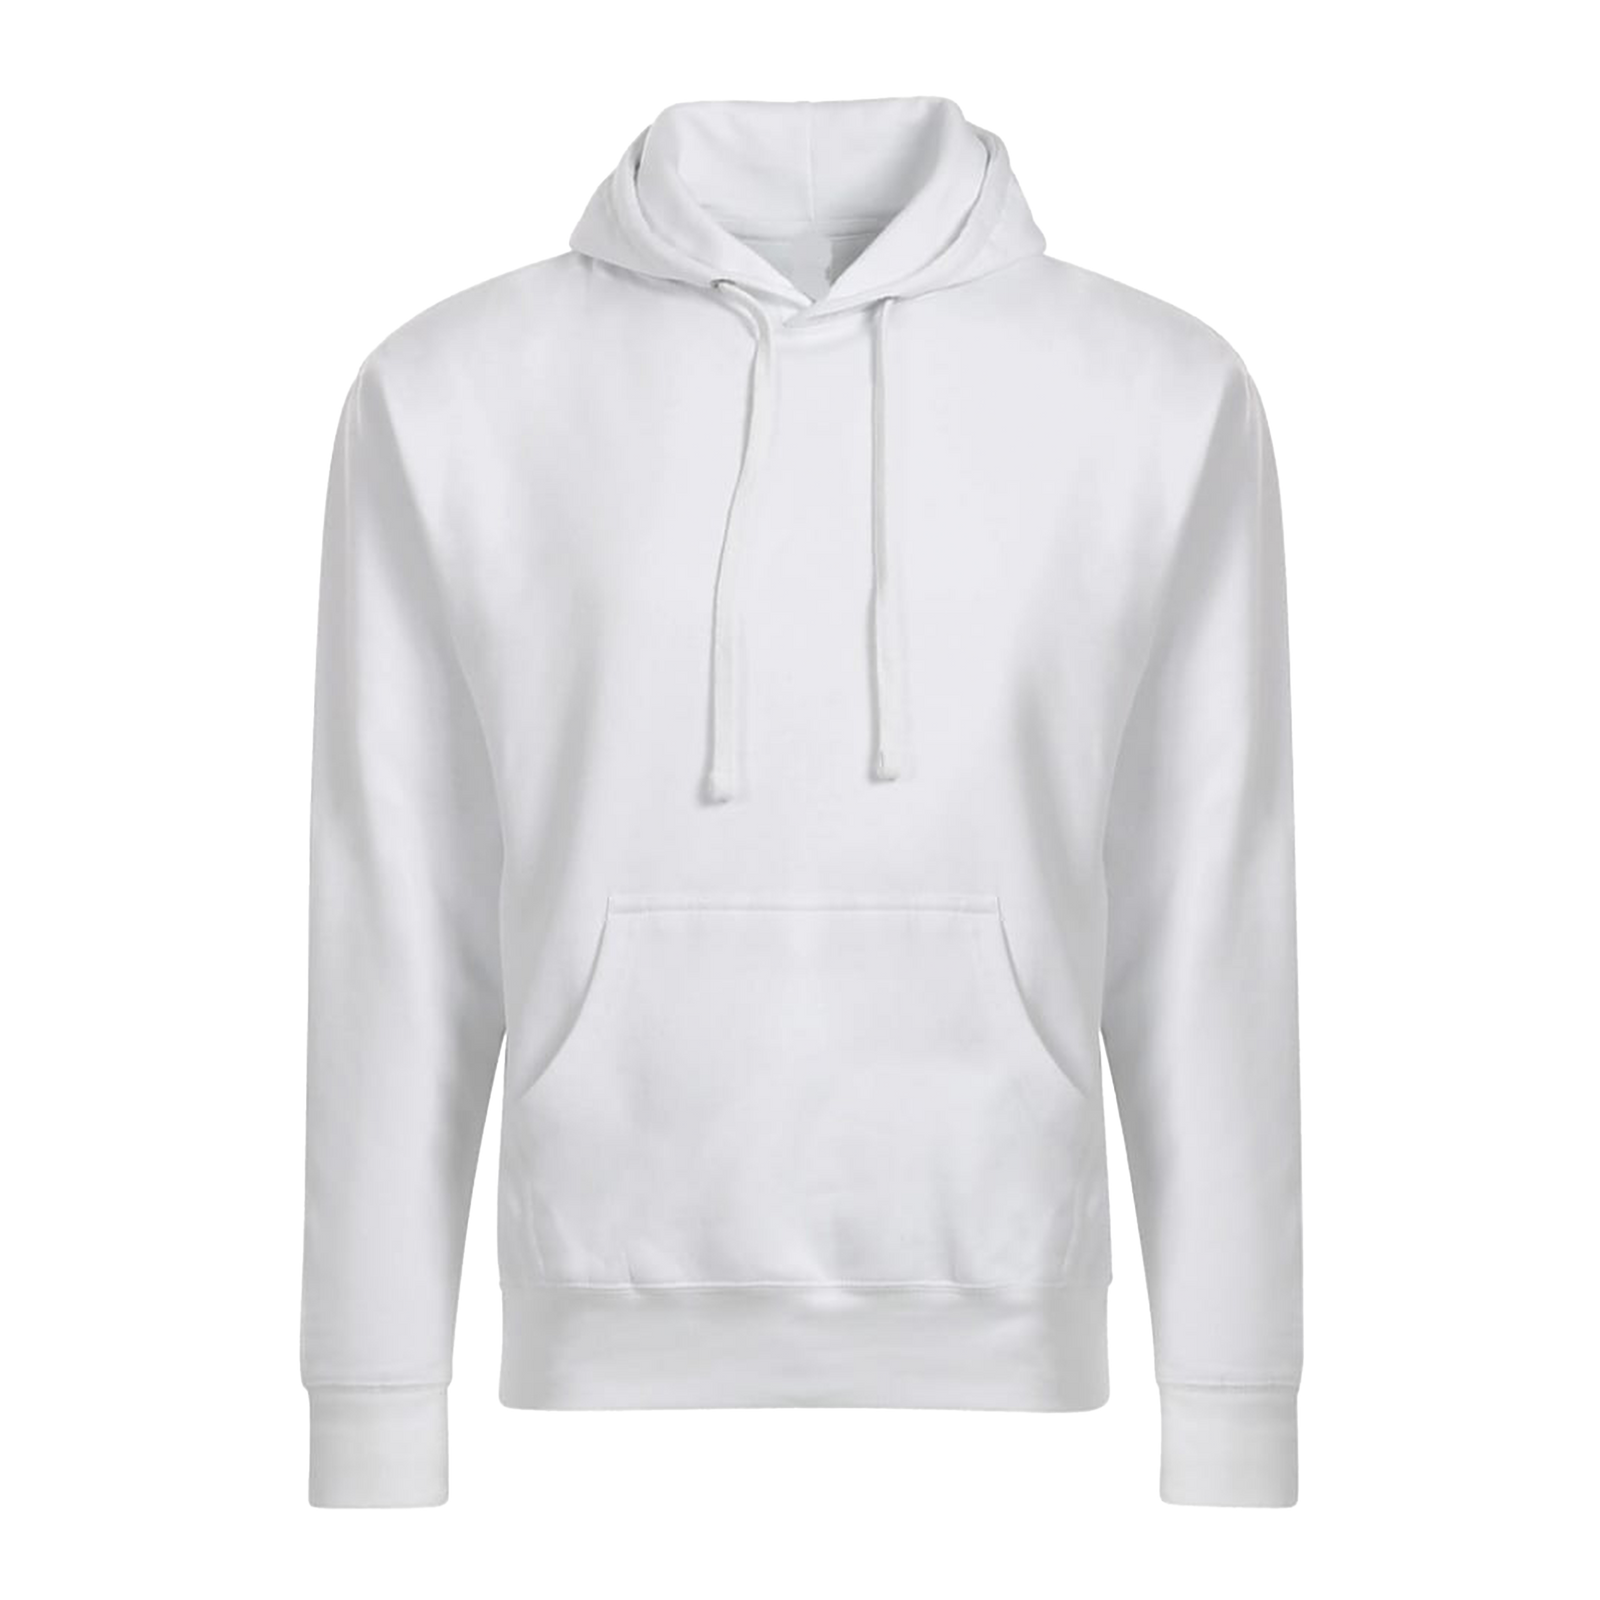 Reflections Apparel Fleece Hoodie - Adult Unisex Sizing S-3XL - White